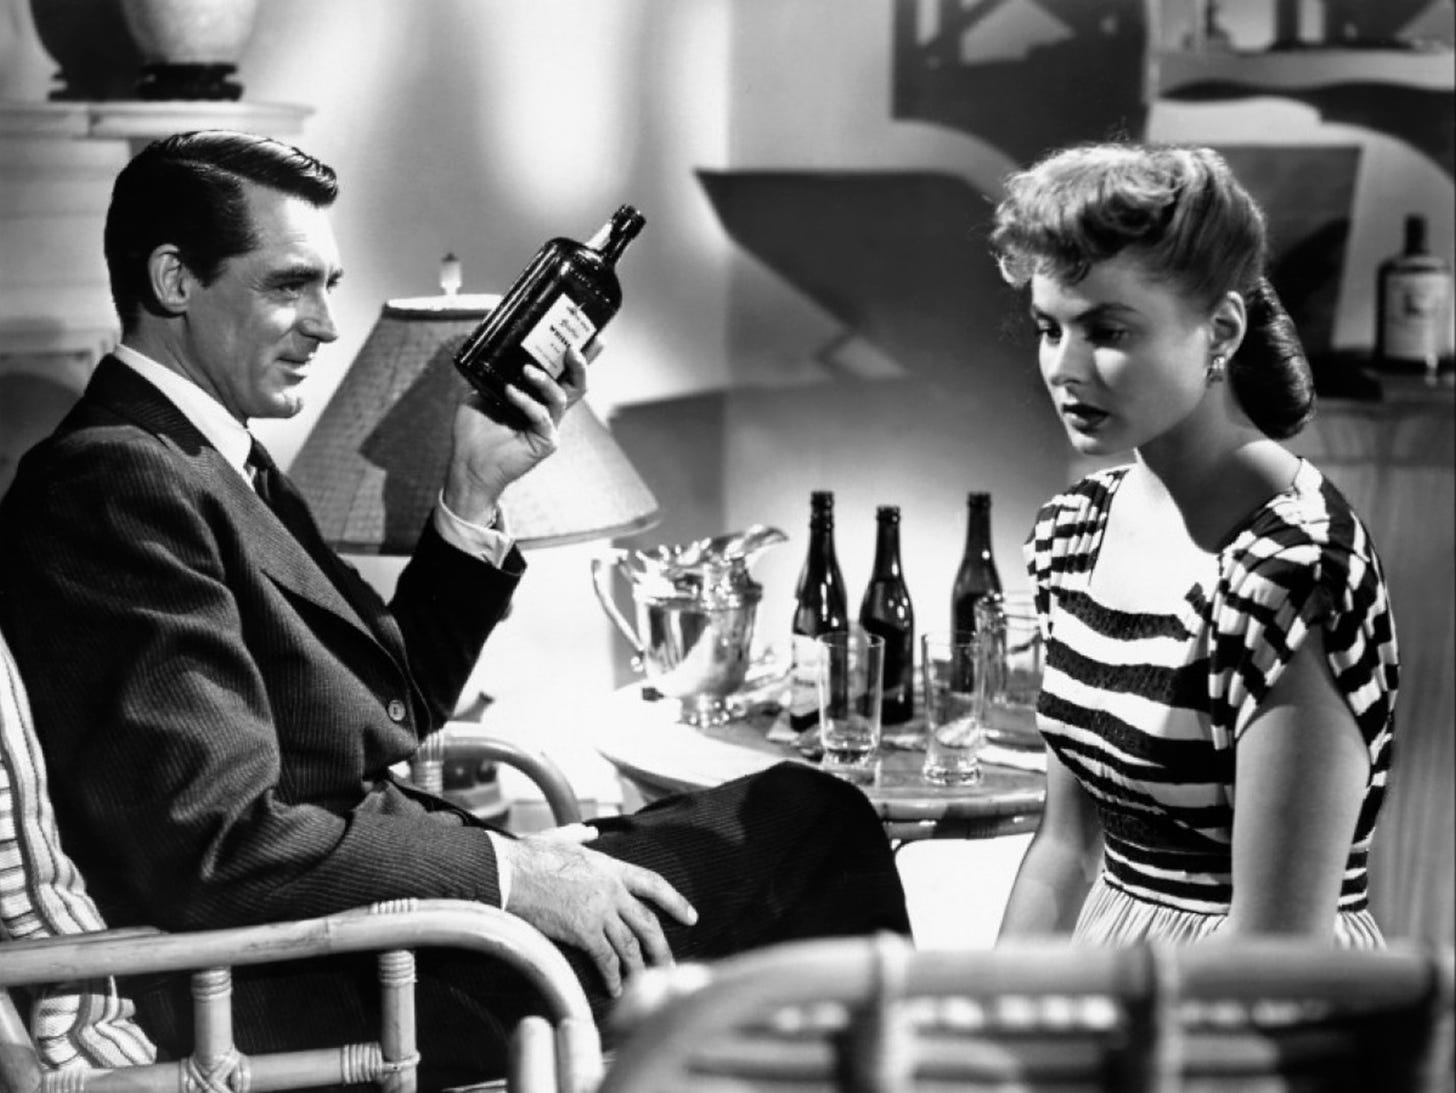 Cary Grant and Ingrid Bergman sitting across from each other, drunk out of their minds